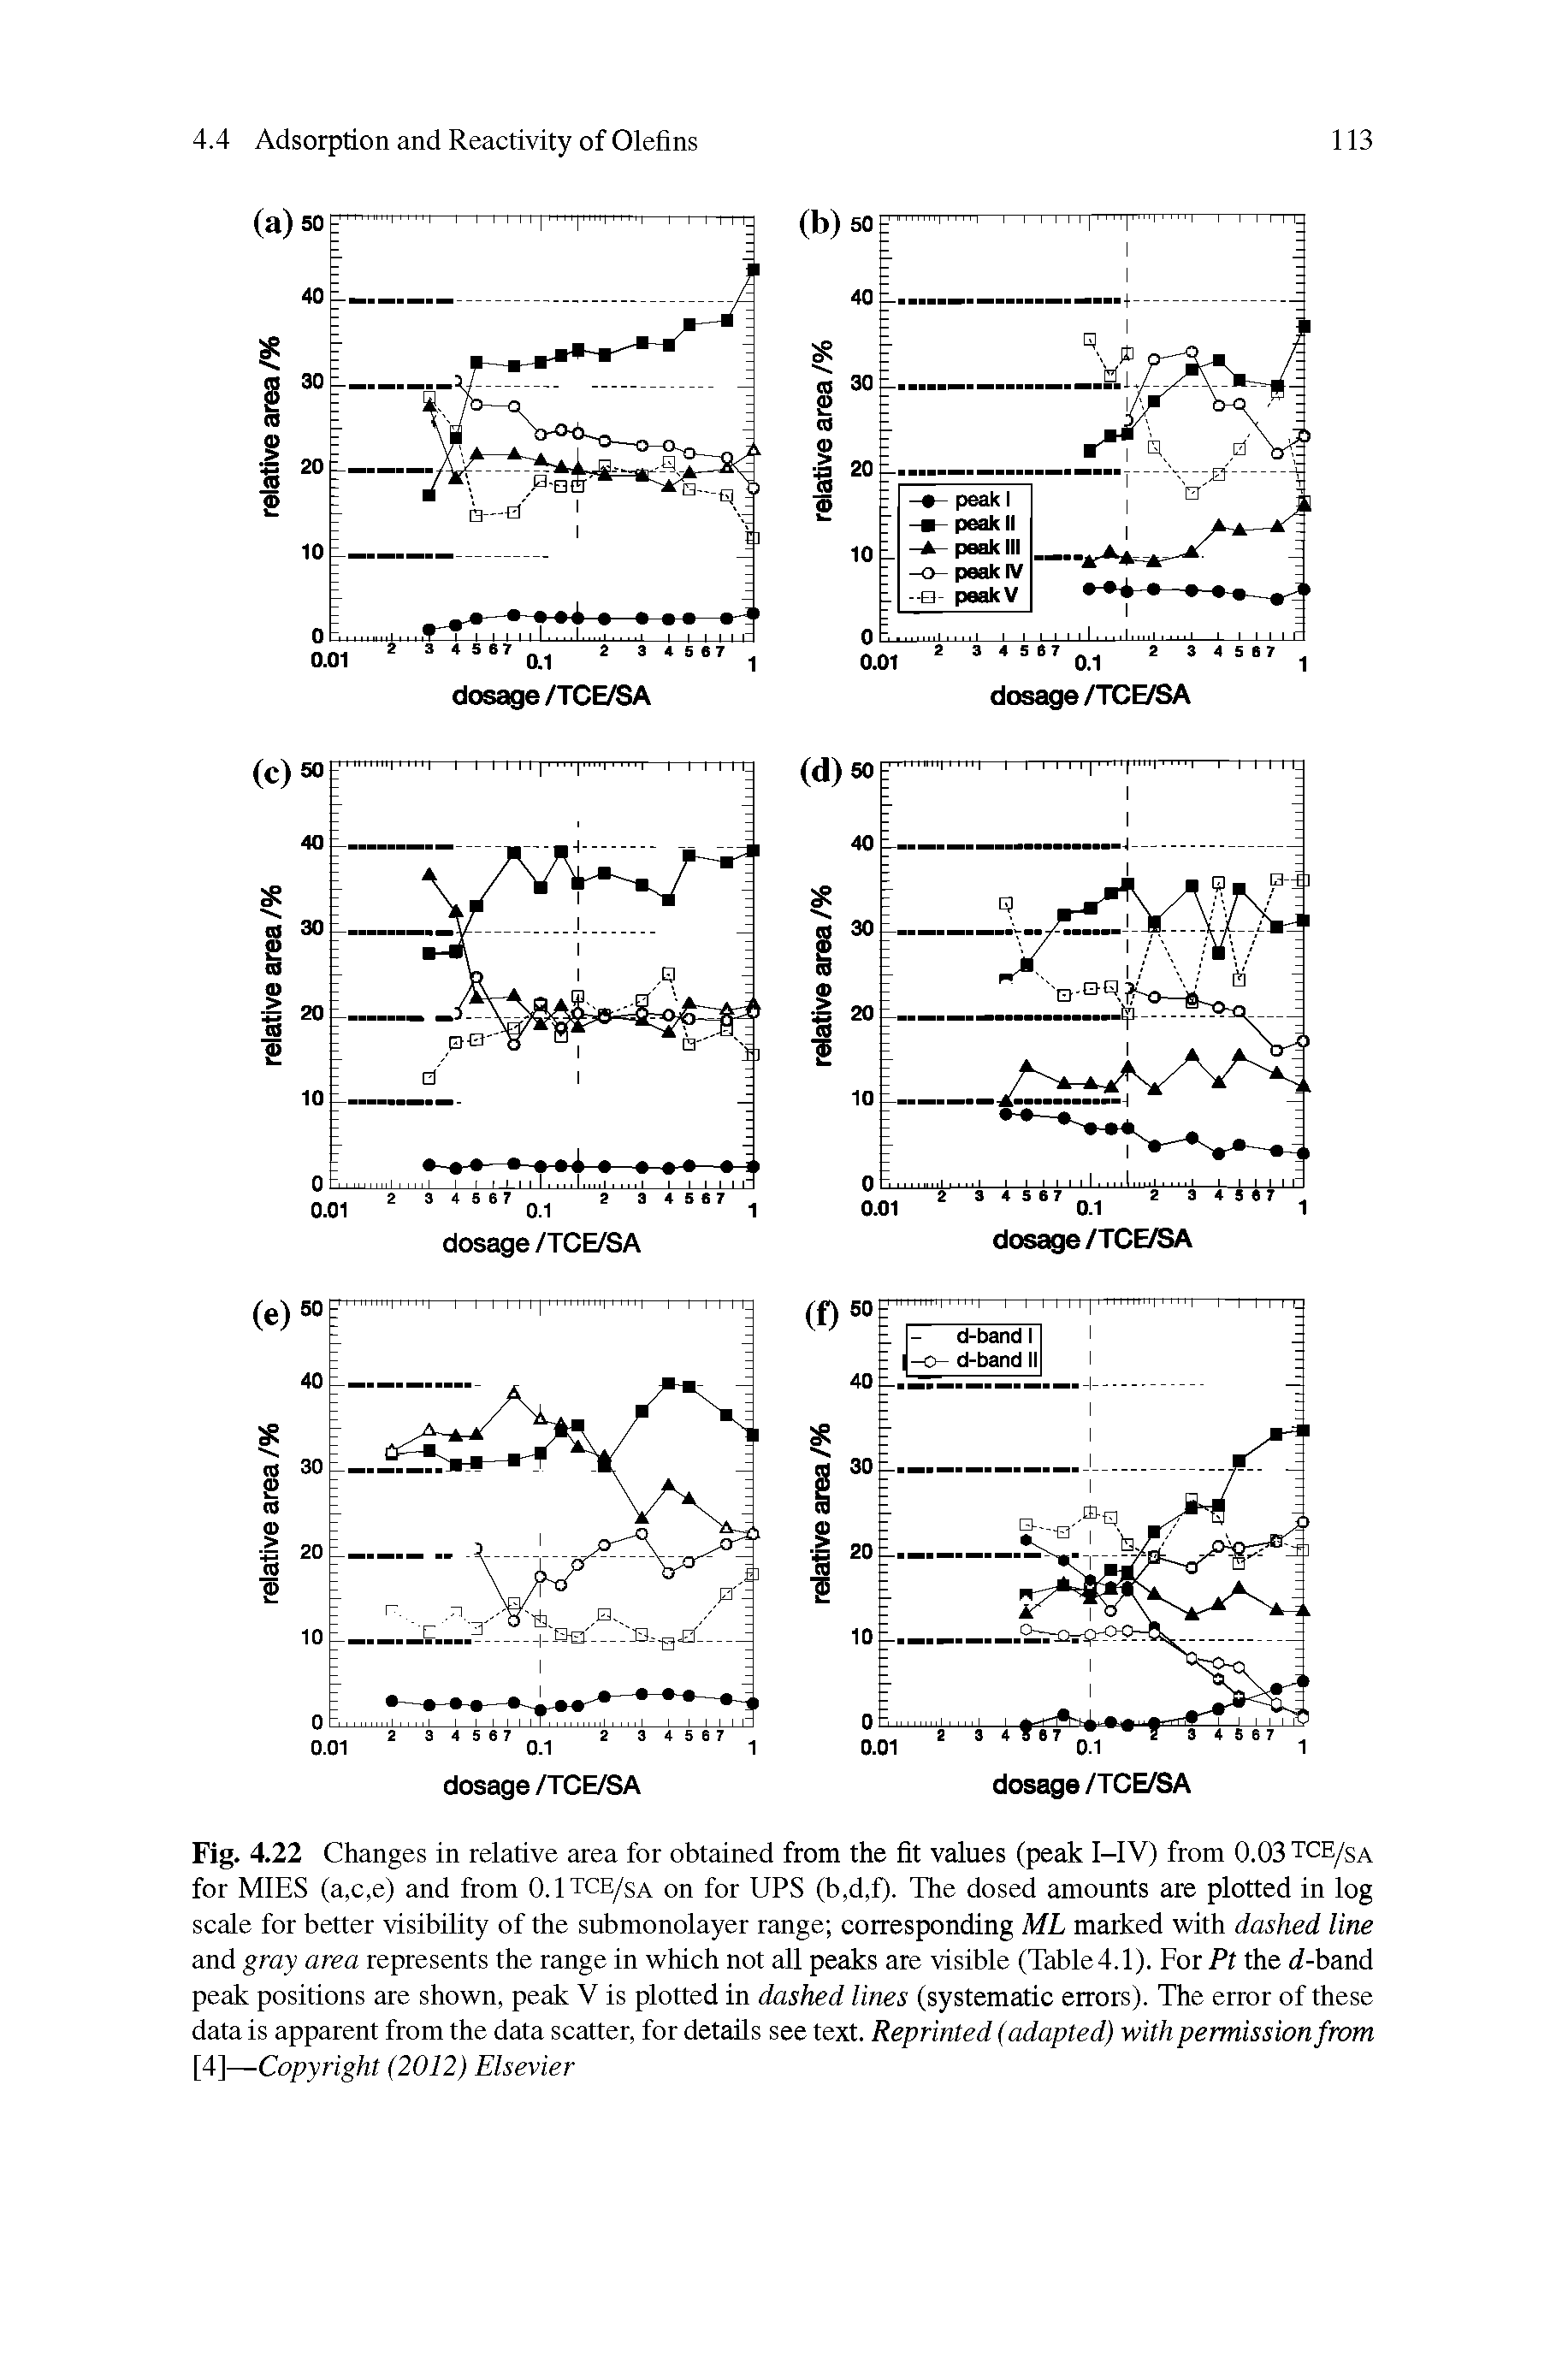 Fig. 4.22 Changes in relative area for obtained from the fit values (peak I-IV) from 0.03 TCE/sa for MIES (a,c,e) and from 0.1tce/sa on for UPS (b,d,f)- The dosed amounts are plotted in log scale for better visibility of the submonolayer range corresponding ML marked with dashed line and gray area represents the range in which not all peaks are visible (Tabled.1). For Pt the d-band peak positions are shown, peak V is plotted in dashed lines (systematic errors). The error of these data is apparent from the data scatter, for details see text. Reprinted (adapted) with permission from [4]—Copyright (2012) Elsevier...